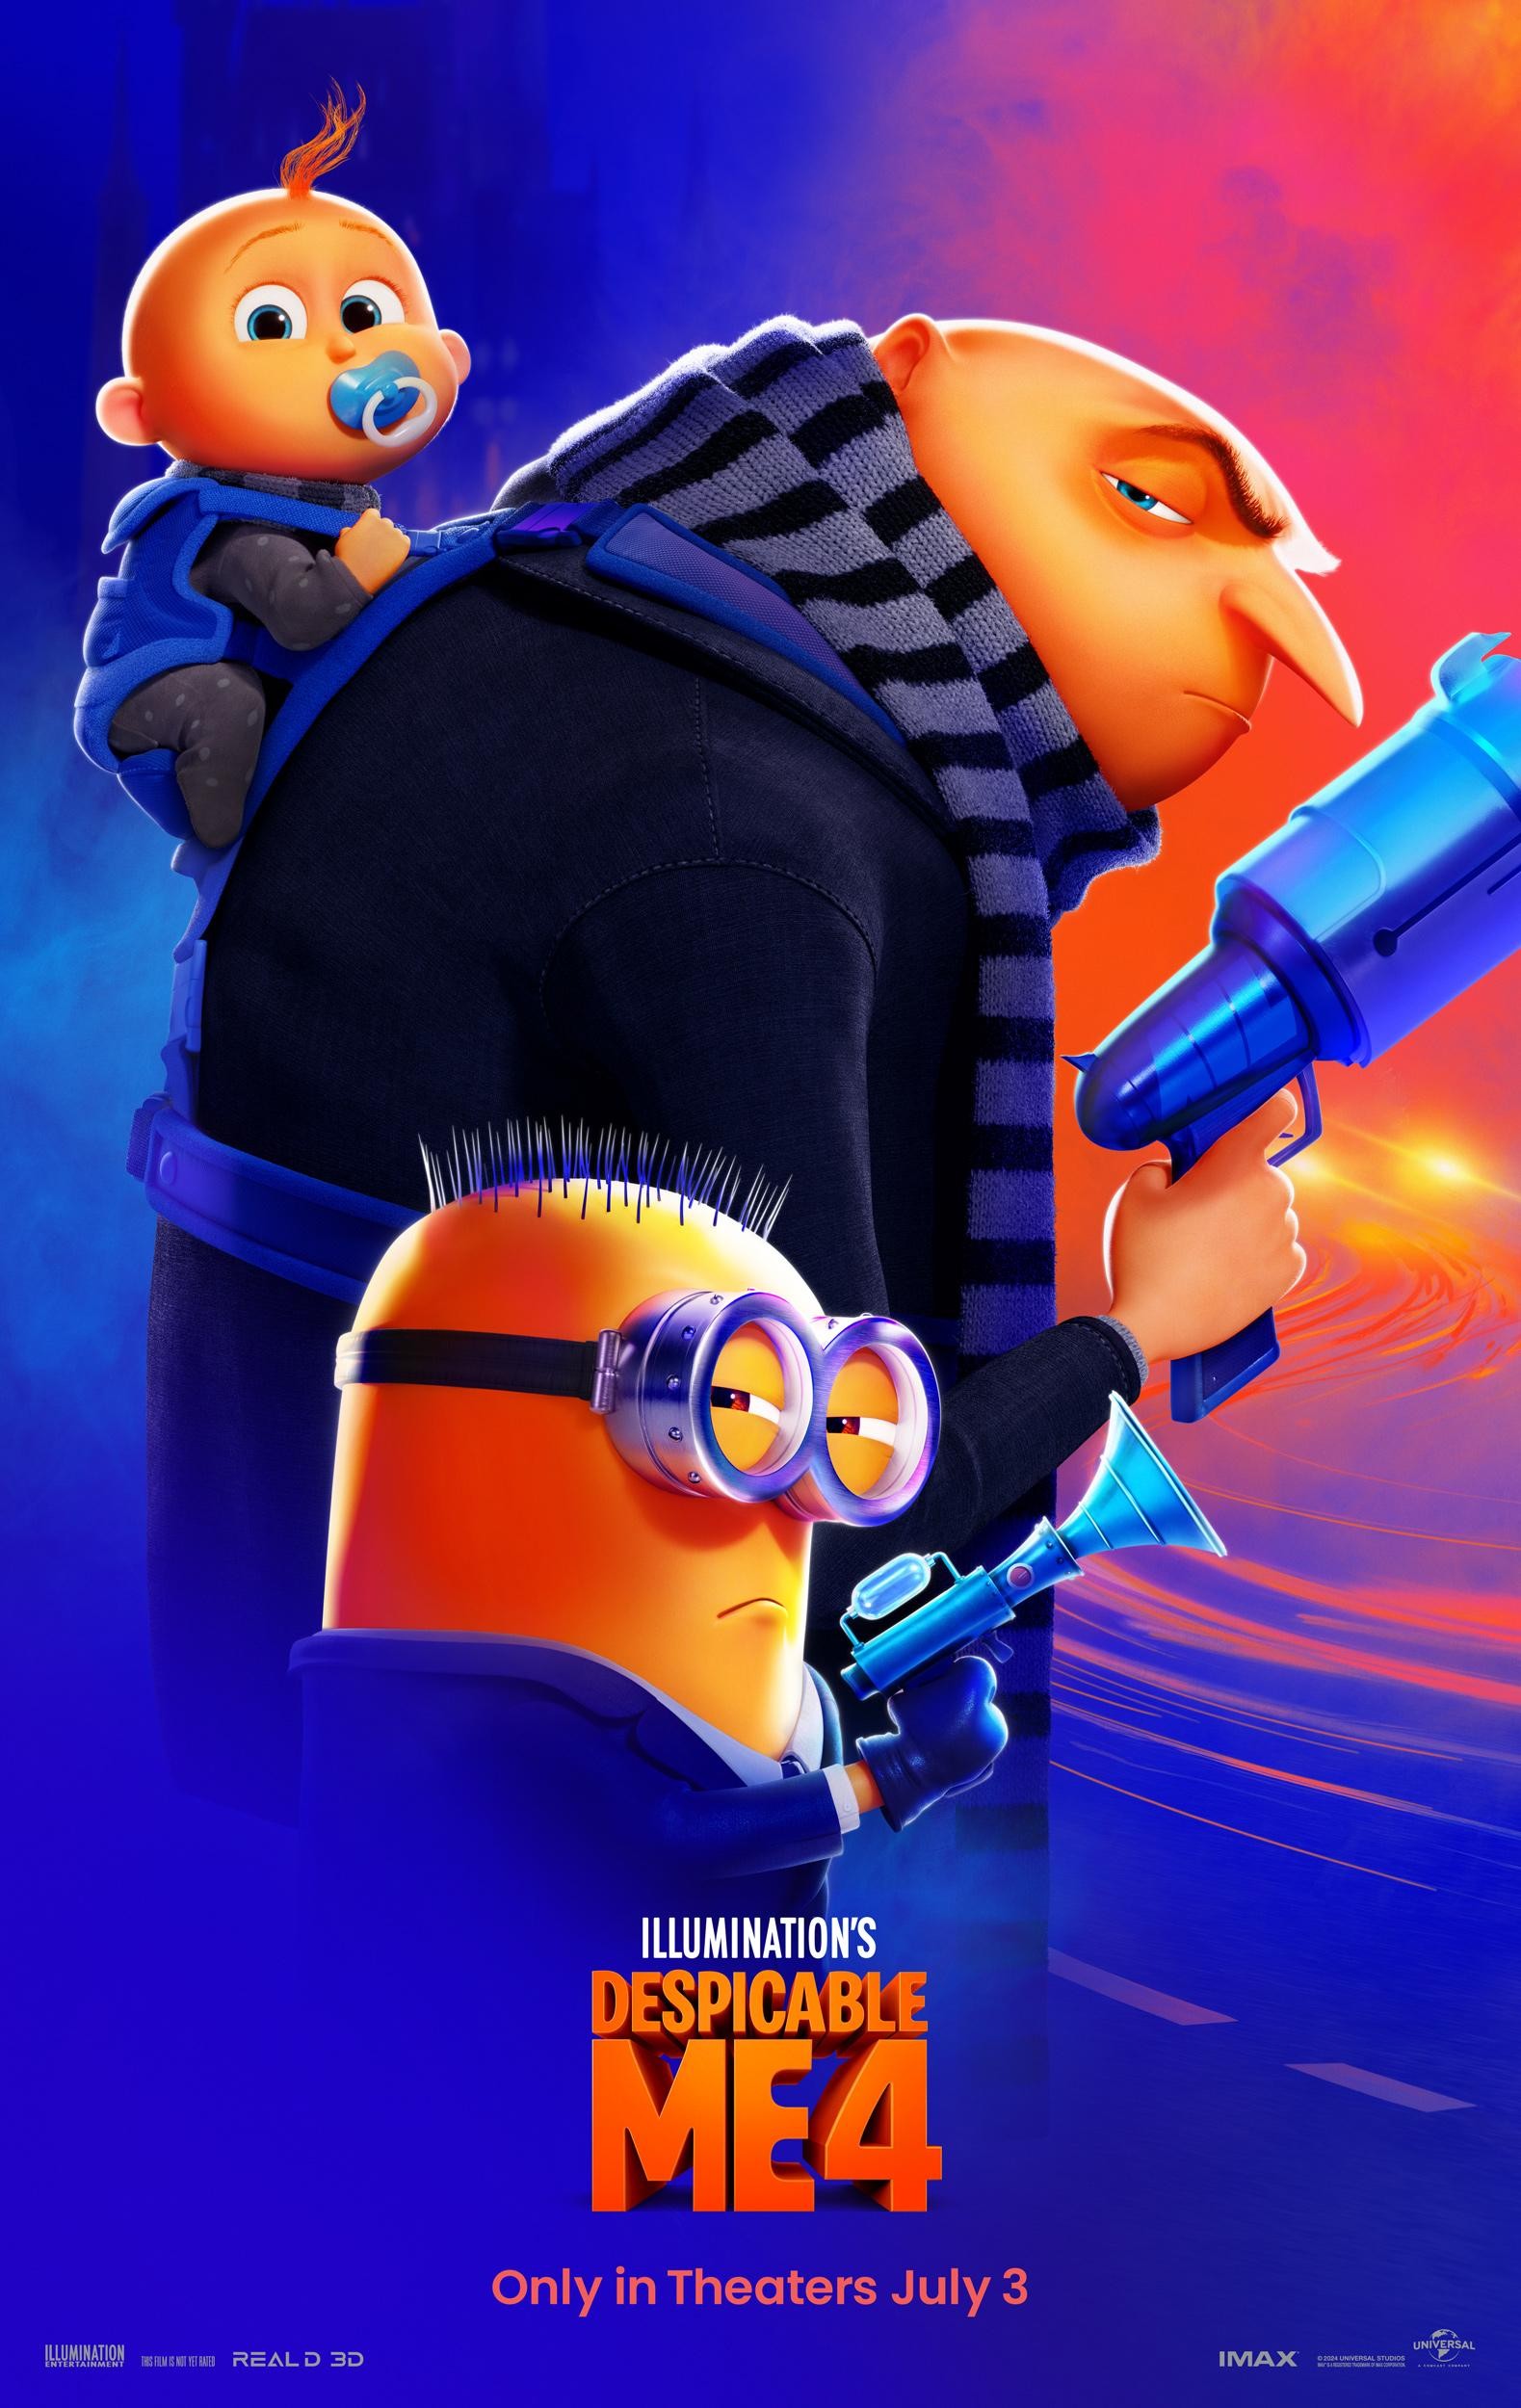 This is one animated sequel I cannot wait to watch in theaters — even if we can't partake in the <strong>Gentleminion TikTok trend</strong> anymore. Gru and his family are up against a new villain, voiced by Will Ferrell (who played a not-quite-cutthroat villain in <strong><em>Barbie</em></strong>). The whole gang is back together, including a new baby Gru Jr.! Watch the <em>Despicable Me 4</em> trailer <strong>here</strong>. <em>Despicable Me 4 hits theaters July 3 and stars Steve Carell, Pierre Coffin, Steve Coogan, Miranda Cosgrove, Joey King, Will Ferrell, Sofia Vergara, and Kristen Wiig.</em>